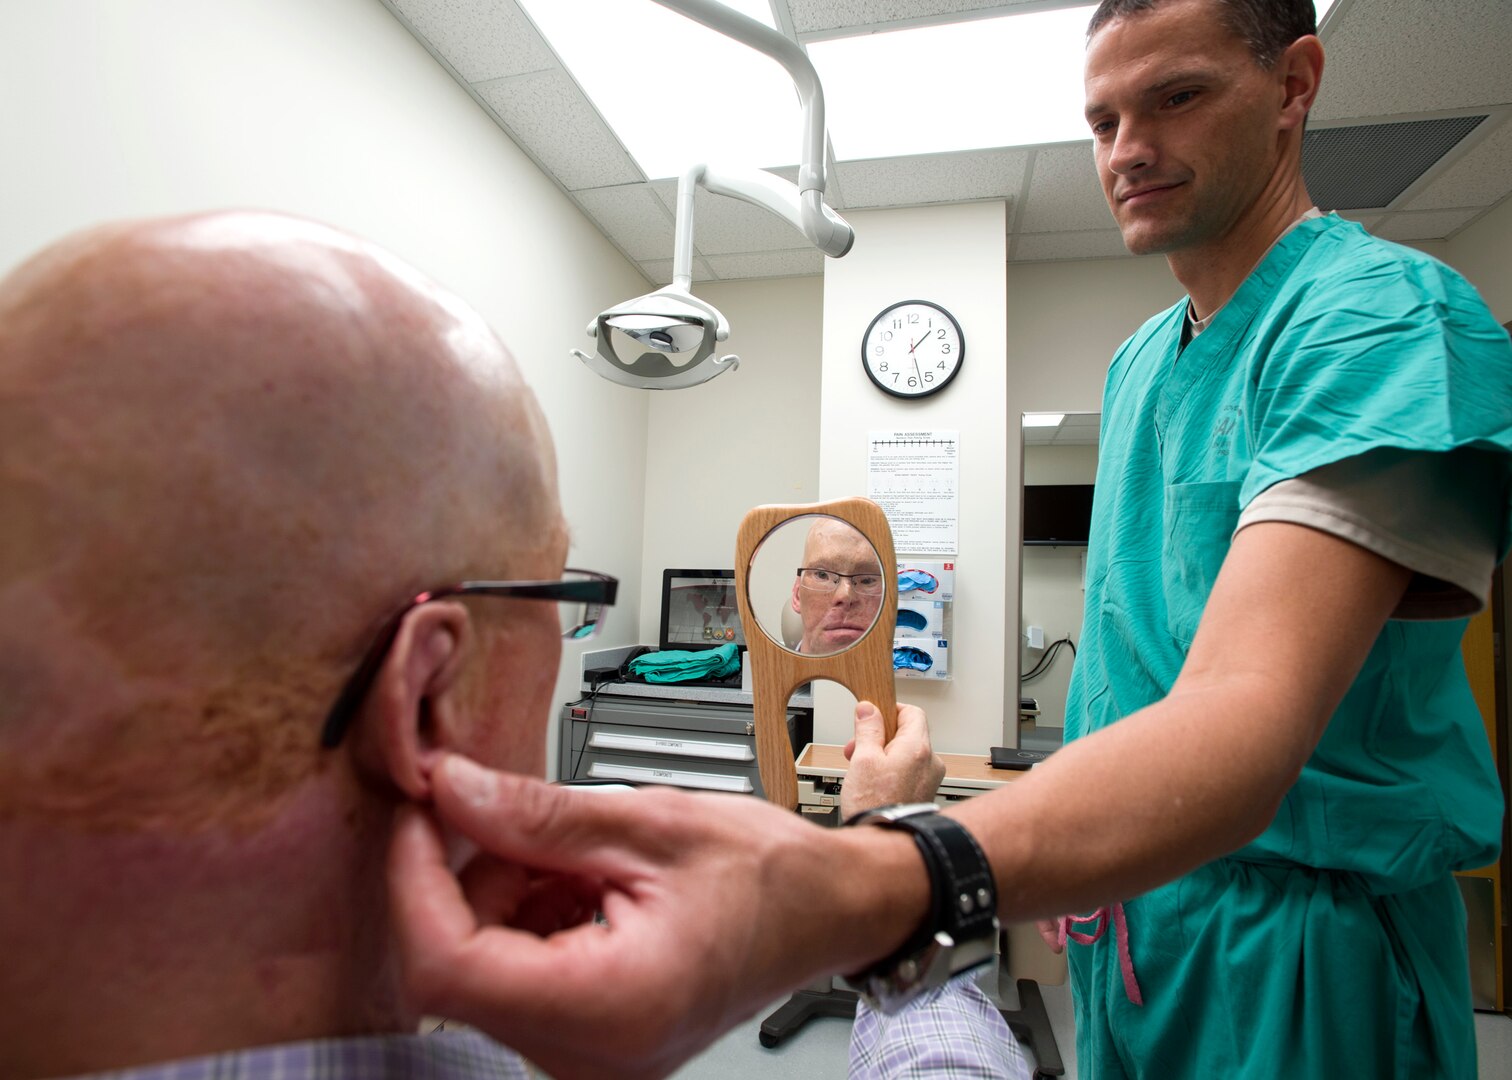 Maj. Stephen Cherrington (right), 59th Dental Group maxillofacial prosthodontist, checks the fitting of retired Army Master Sgt. Todd Nelson’s prosthetic ear at the San Antonio Military Medical Center, Joint Base San Antonio-Fort Sam Houston, Texas, June 28. The 59th Medical Wing's Maxillofacial Prosthetics Department is one of only a few in the Department of Defense that creates prosthetic body parts, such as eyes, ears and noses. (U.S. Air Force photo/Staff Sgt. Kevin Iinuma)